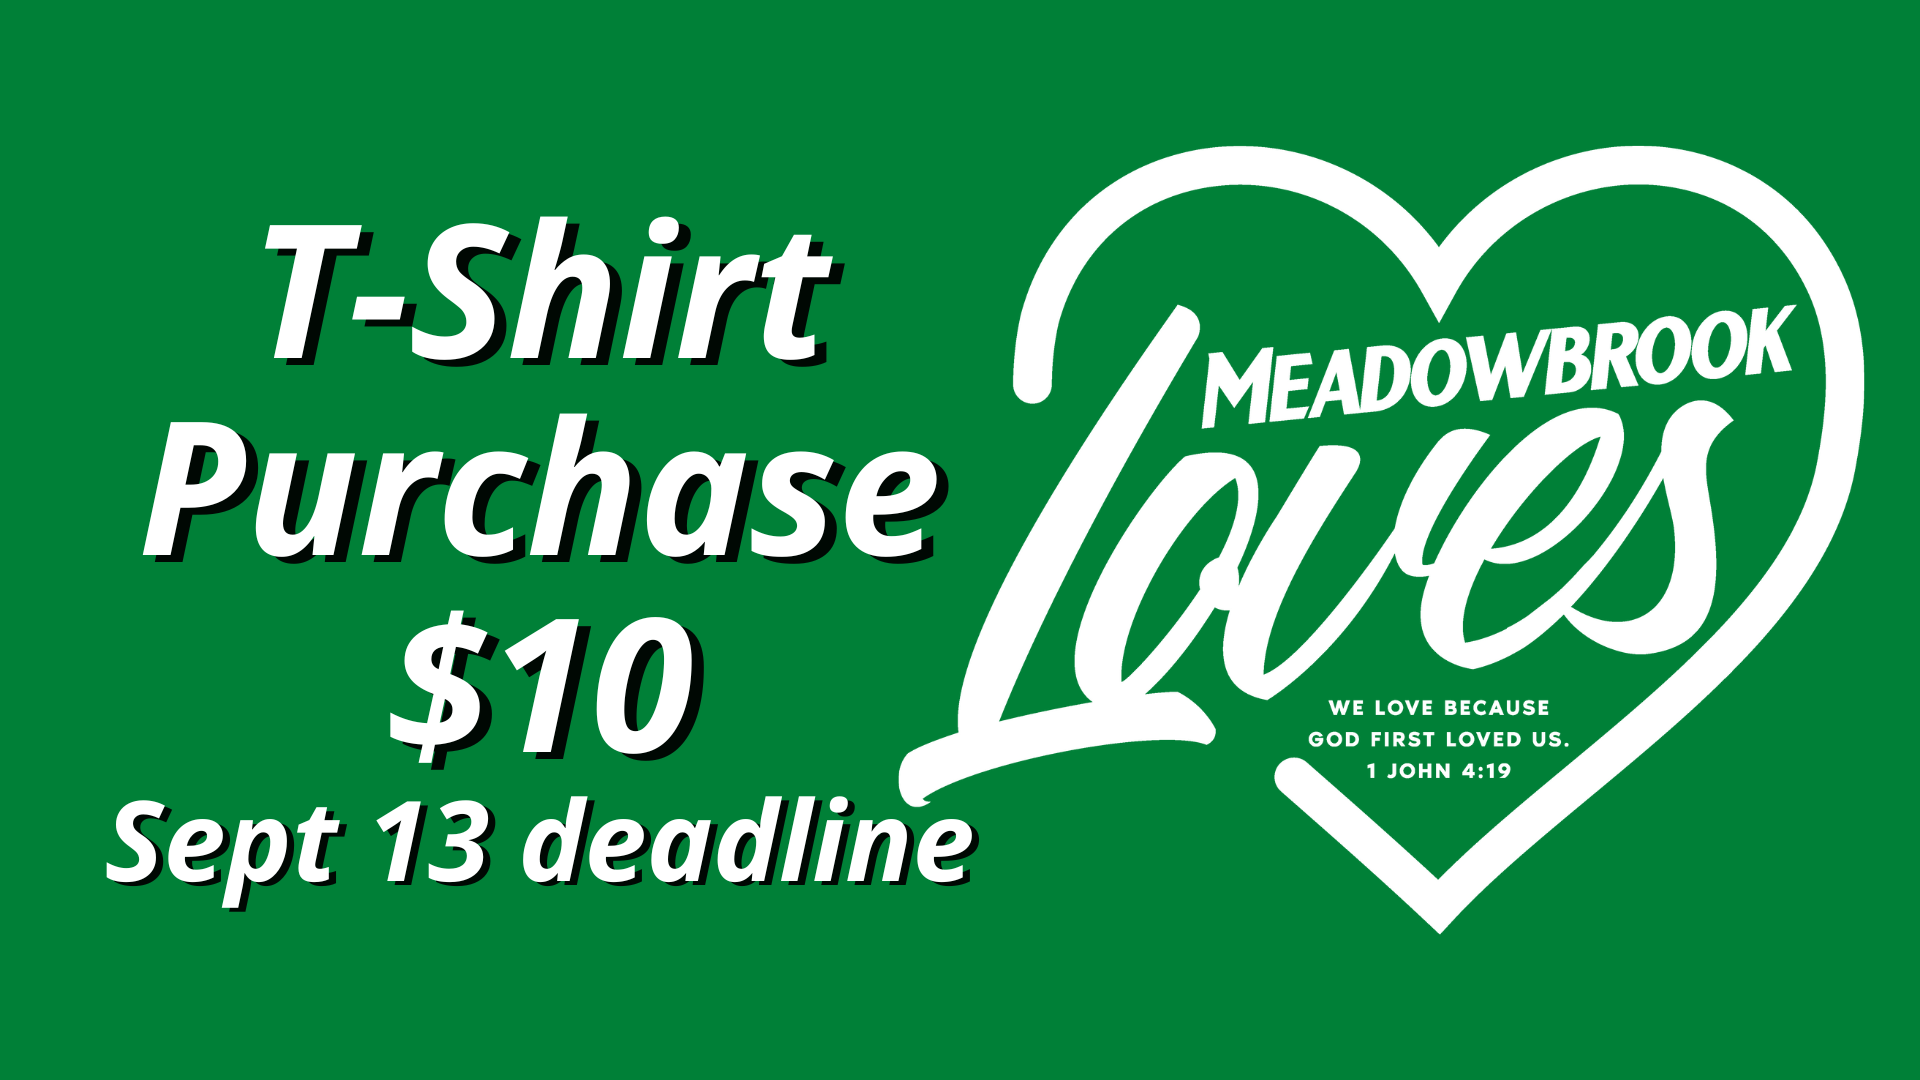 Meadowbrook LOVES GREEN t-shirt purchase web (1920 × 1080 px).png